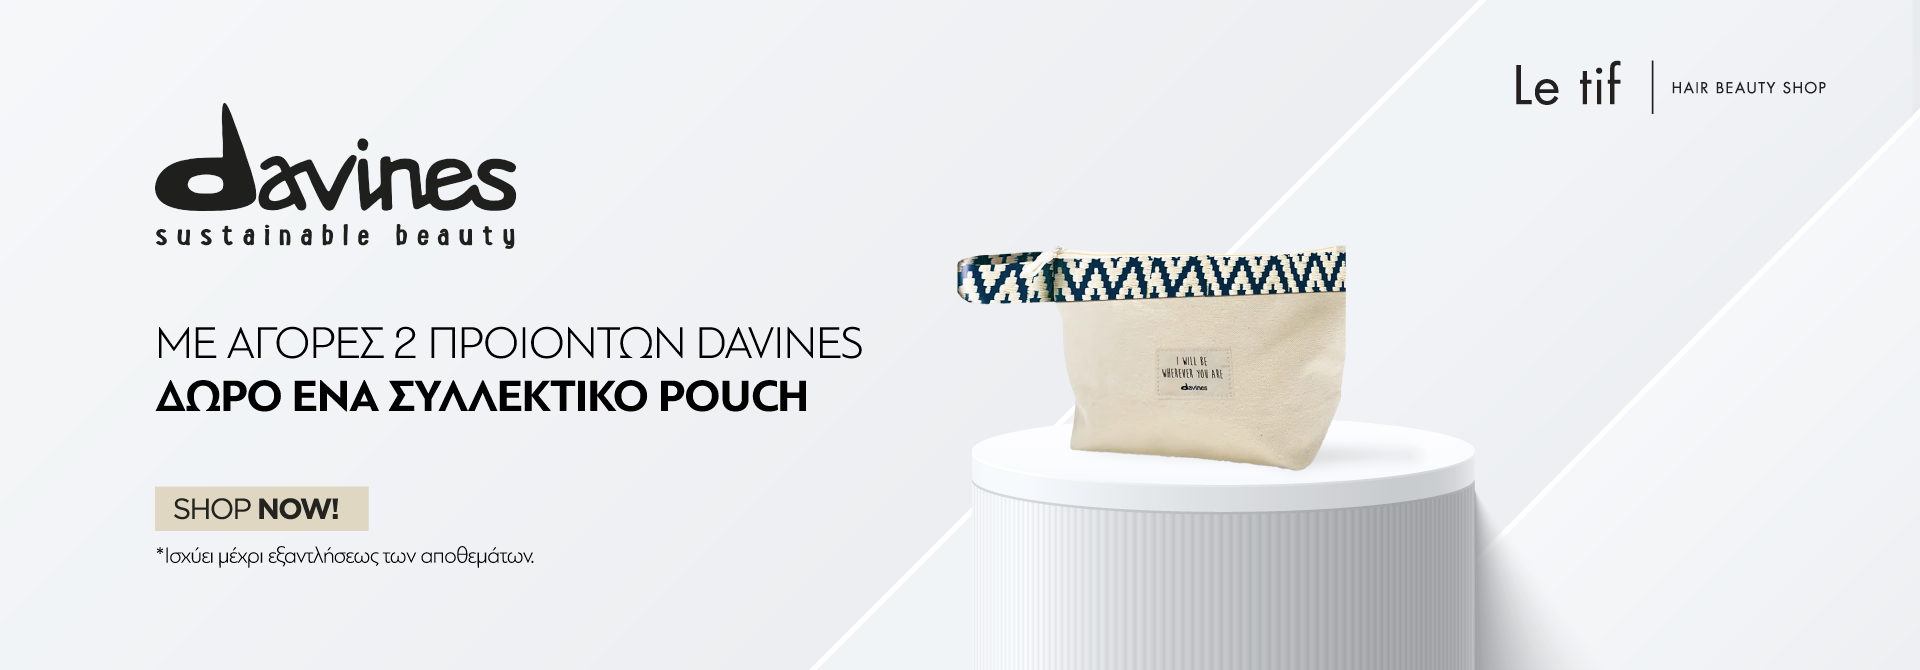 Davines Pouch Offer - Gift